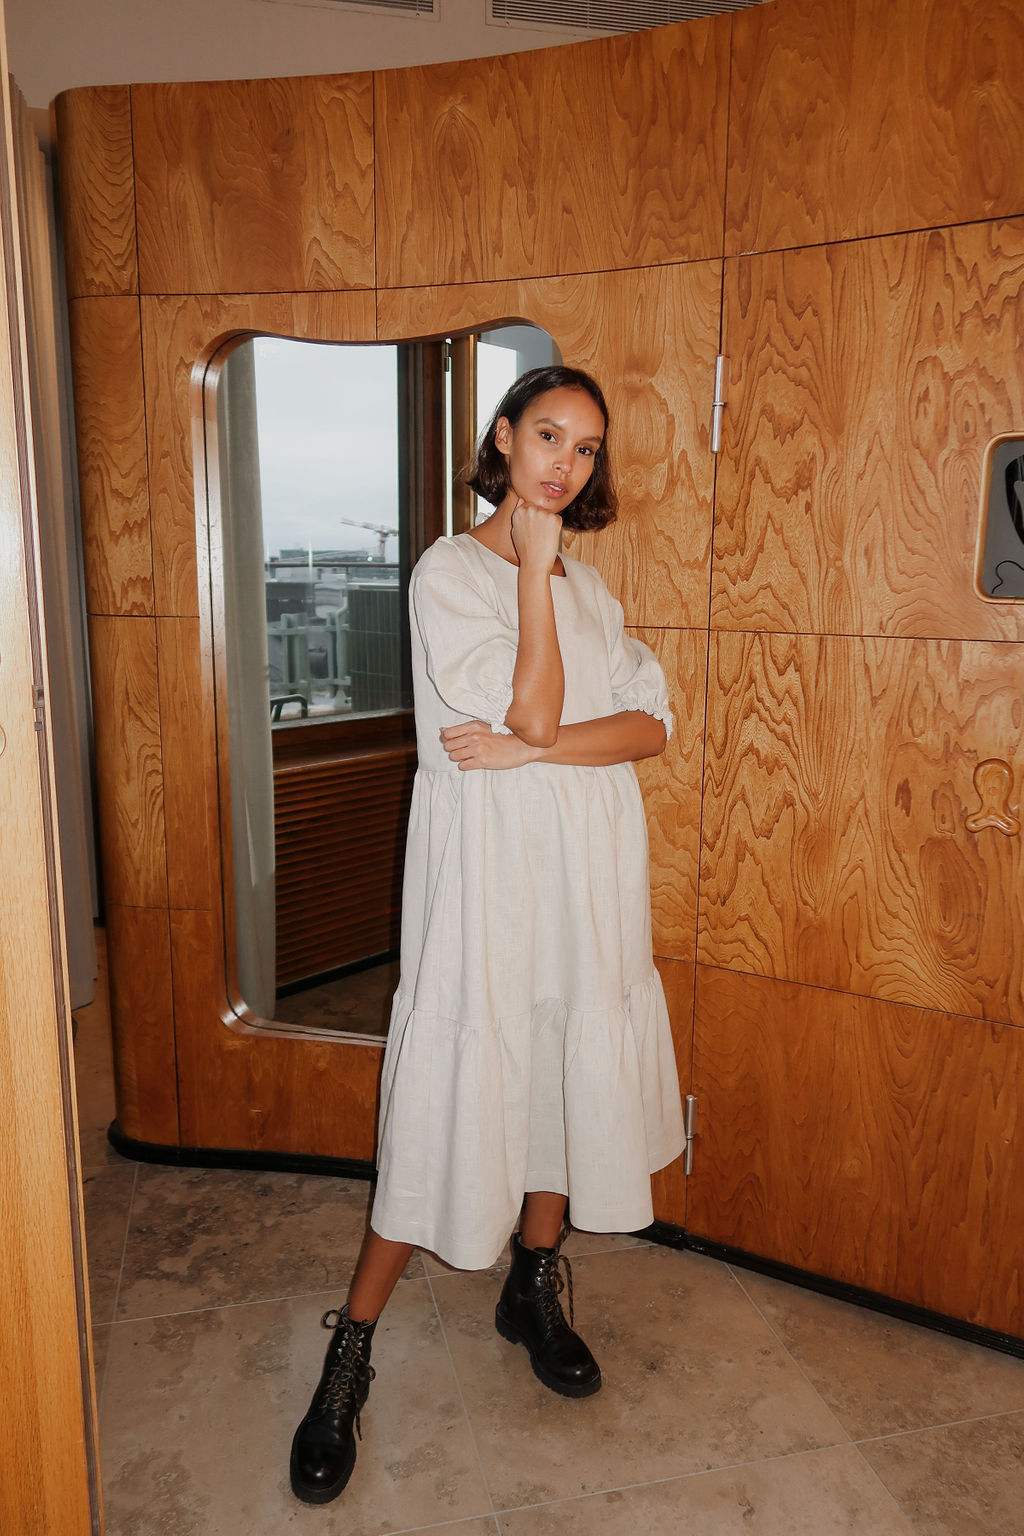 The dreamy Puff Midi Dress adopts to any occasion, depending on the fabric you use. Puff Midi Dress dress has a feminine and relaxed silhouette with wide frills at hem and short puff sleeves with elastic cuffs. The dress has an O-neck and slit opening at back. 